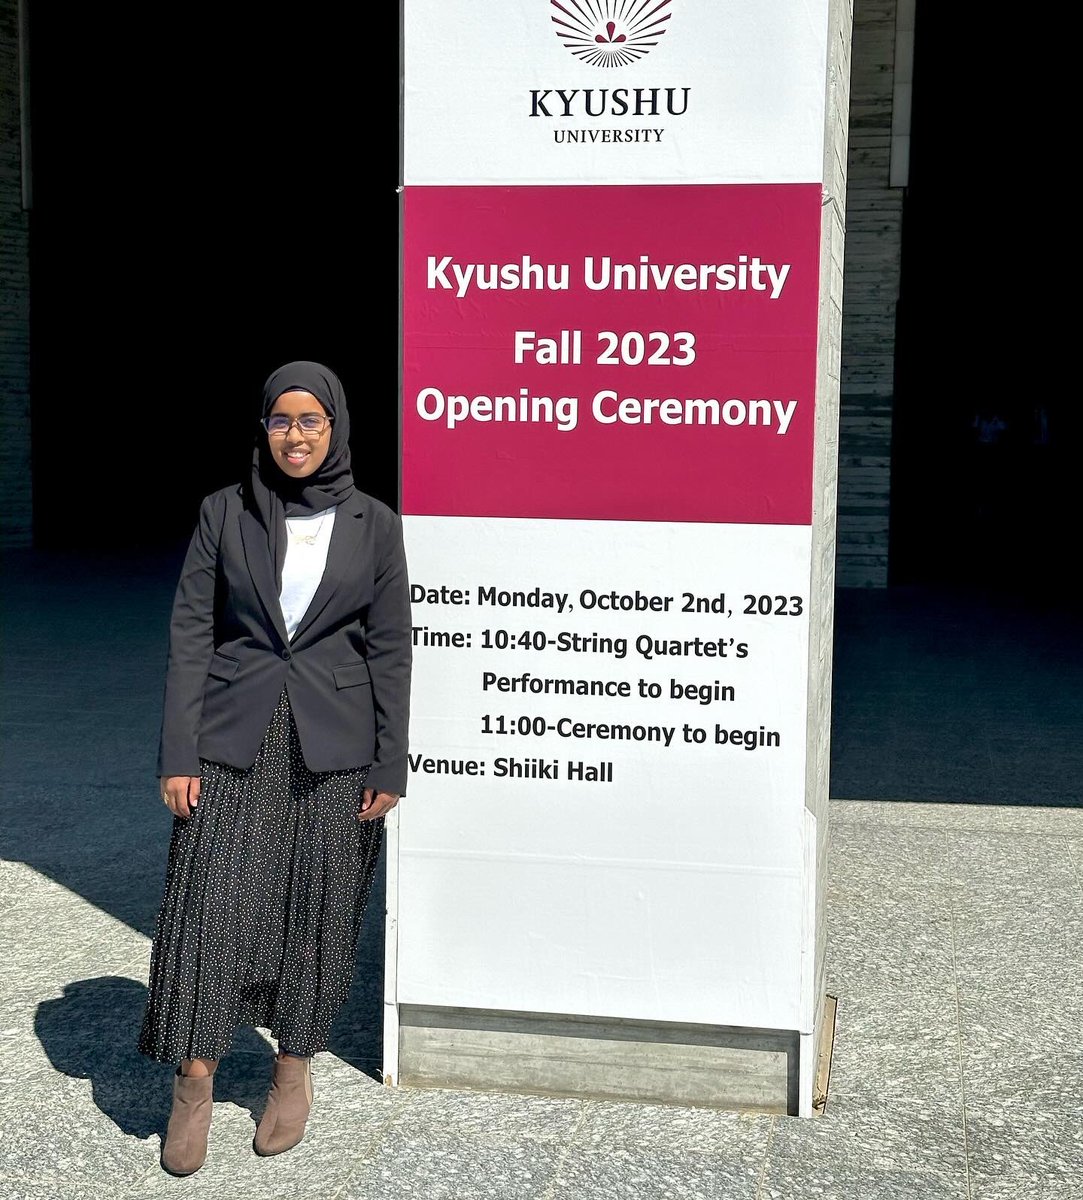 Starting a new academic year at Kyushu University @KyushuUniv_EN ,where research and learning thrive! I’m super excited and ready for this journey ahead✨☀️📚📸
#newschoolyear 
#kyushu 
#nihon🇯🇵